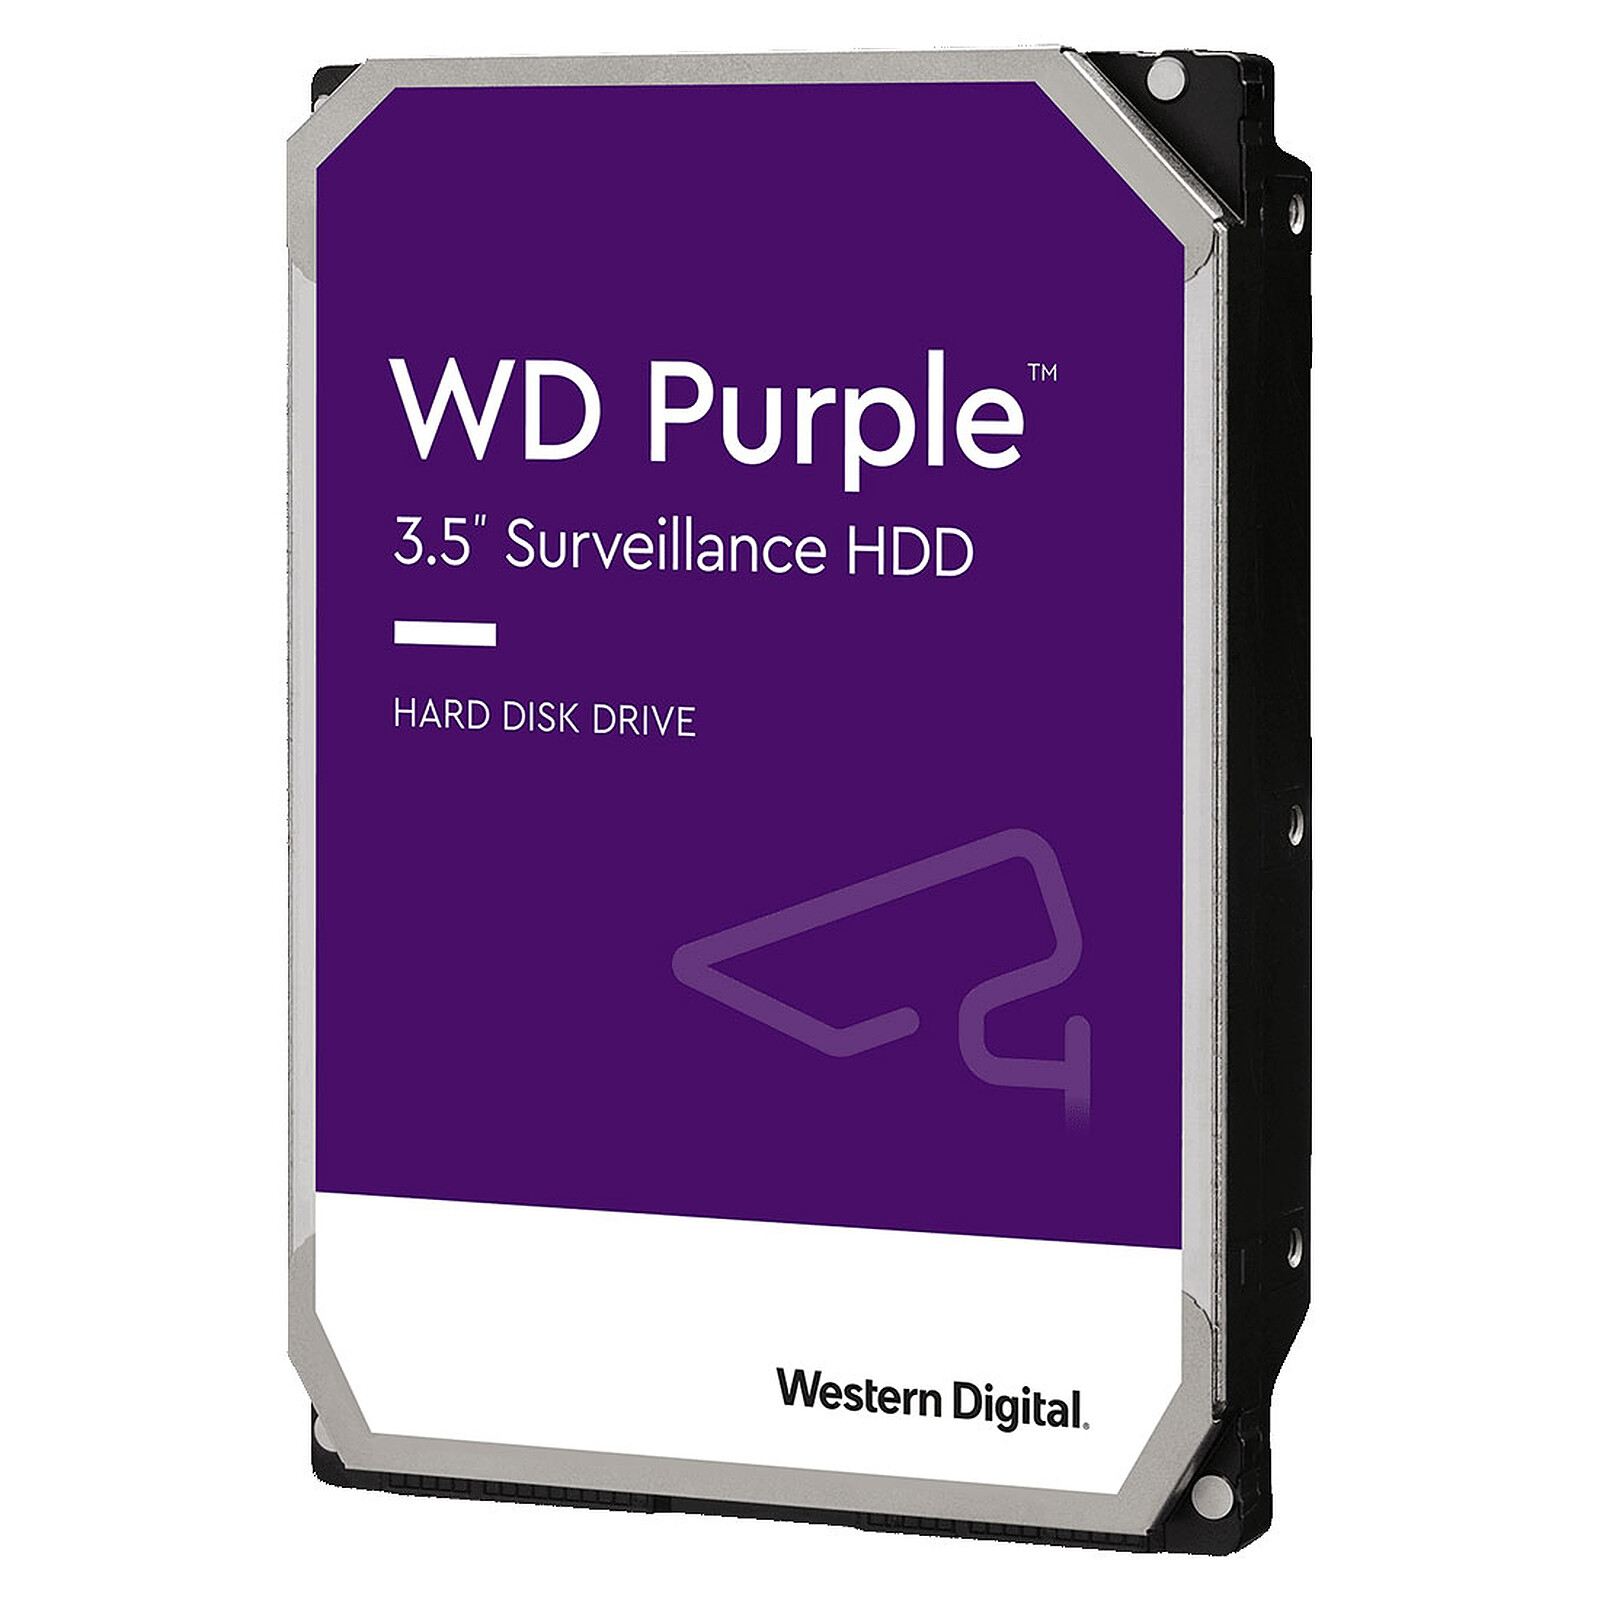 Disque Dur interne WD 3To HDD 3.5 pouces -support de stockage